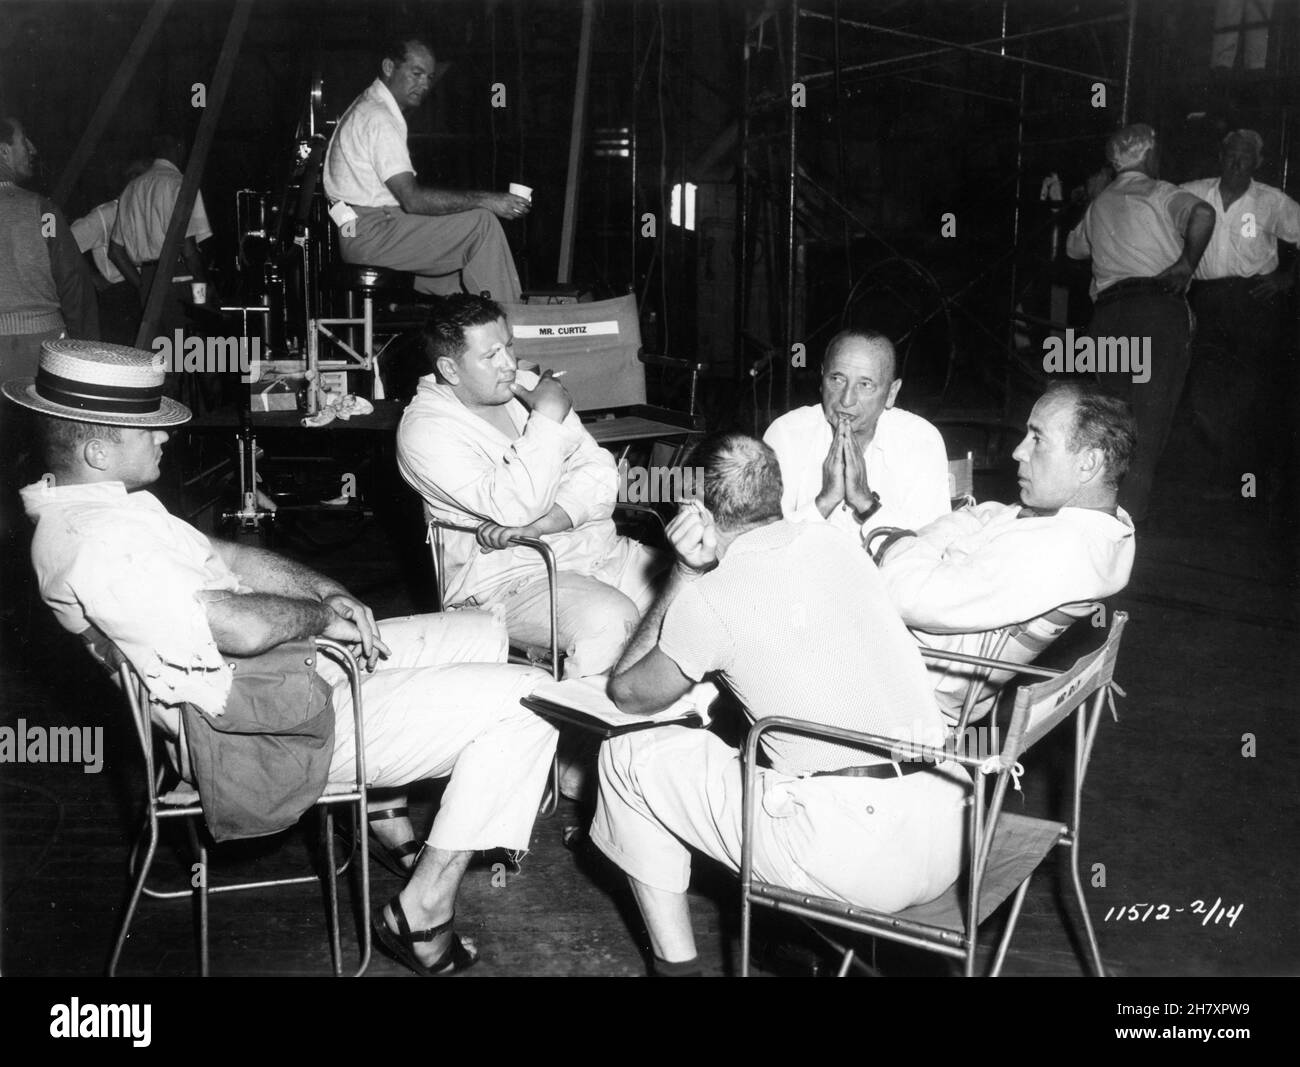 ALDO RAY PETER USTINOV Director MICHAEL CURTIZ and HUMPHREY BOGART on set candid during filming of WE'RE NO ANGELS 1955 director MICHAEL CURTIZ play Albert Husson costume design Mary Grant Paramount Pictures Stock Photo